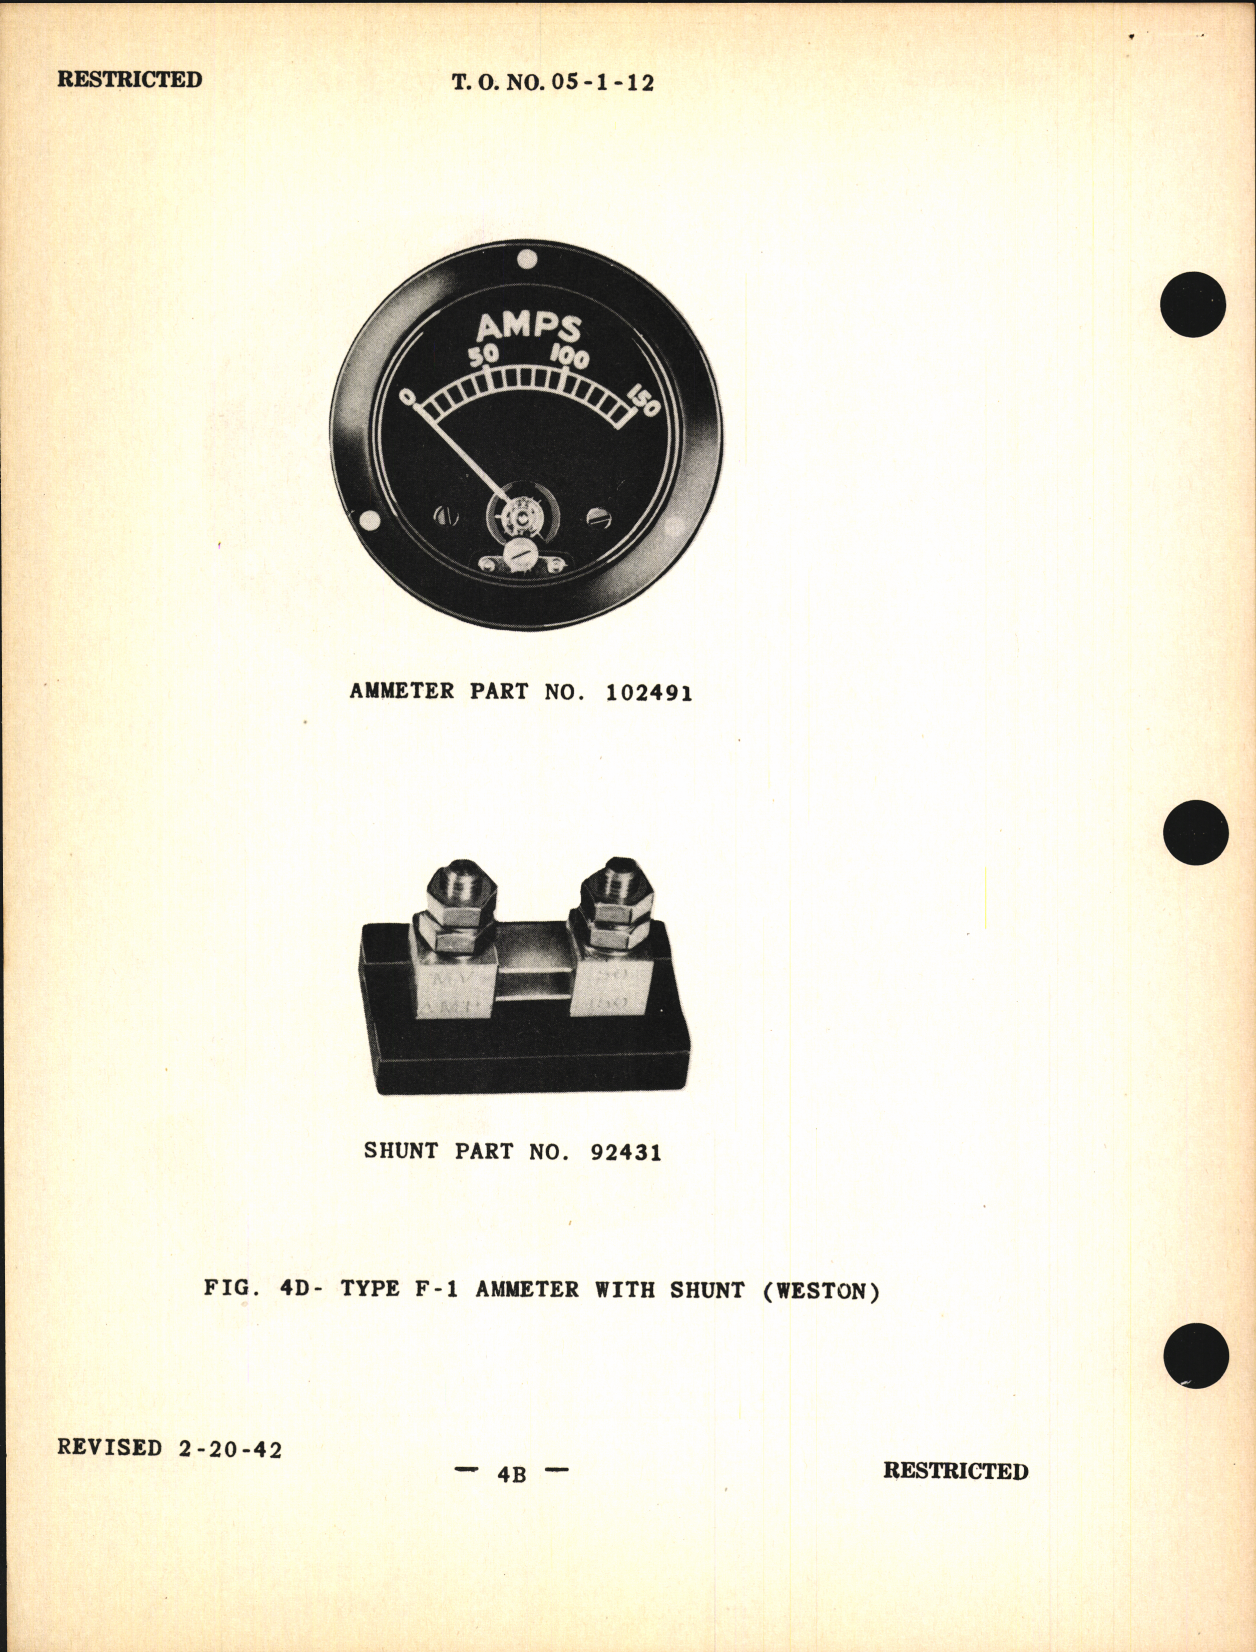 Sample page 8 from AirCorps Library document: Handbook of Service Instructions for Voltmeters, Ammeters, and Volt-Ammeters